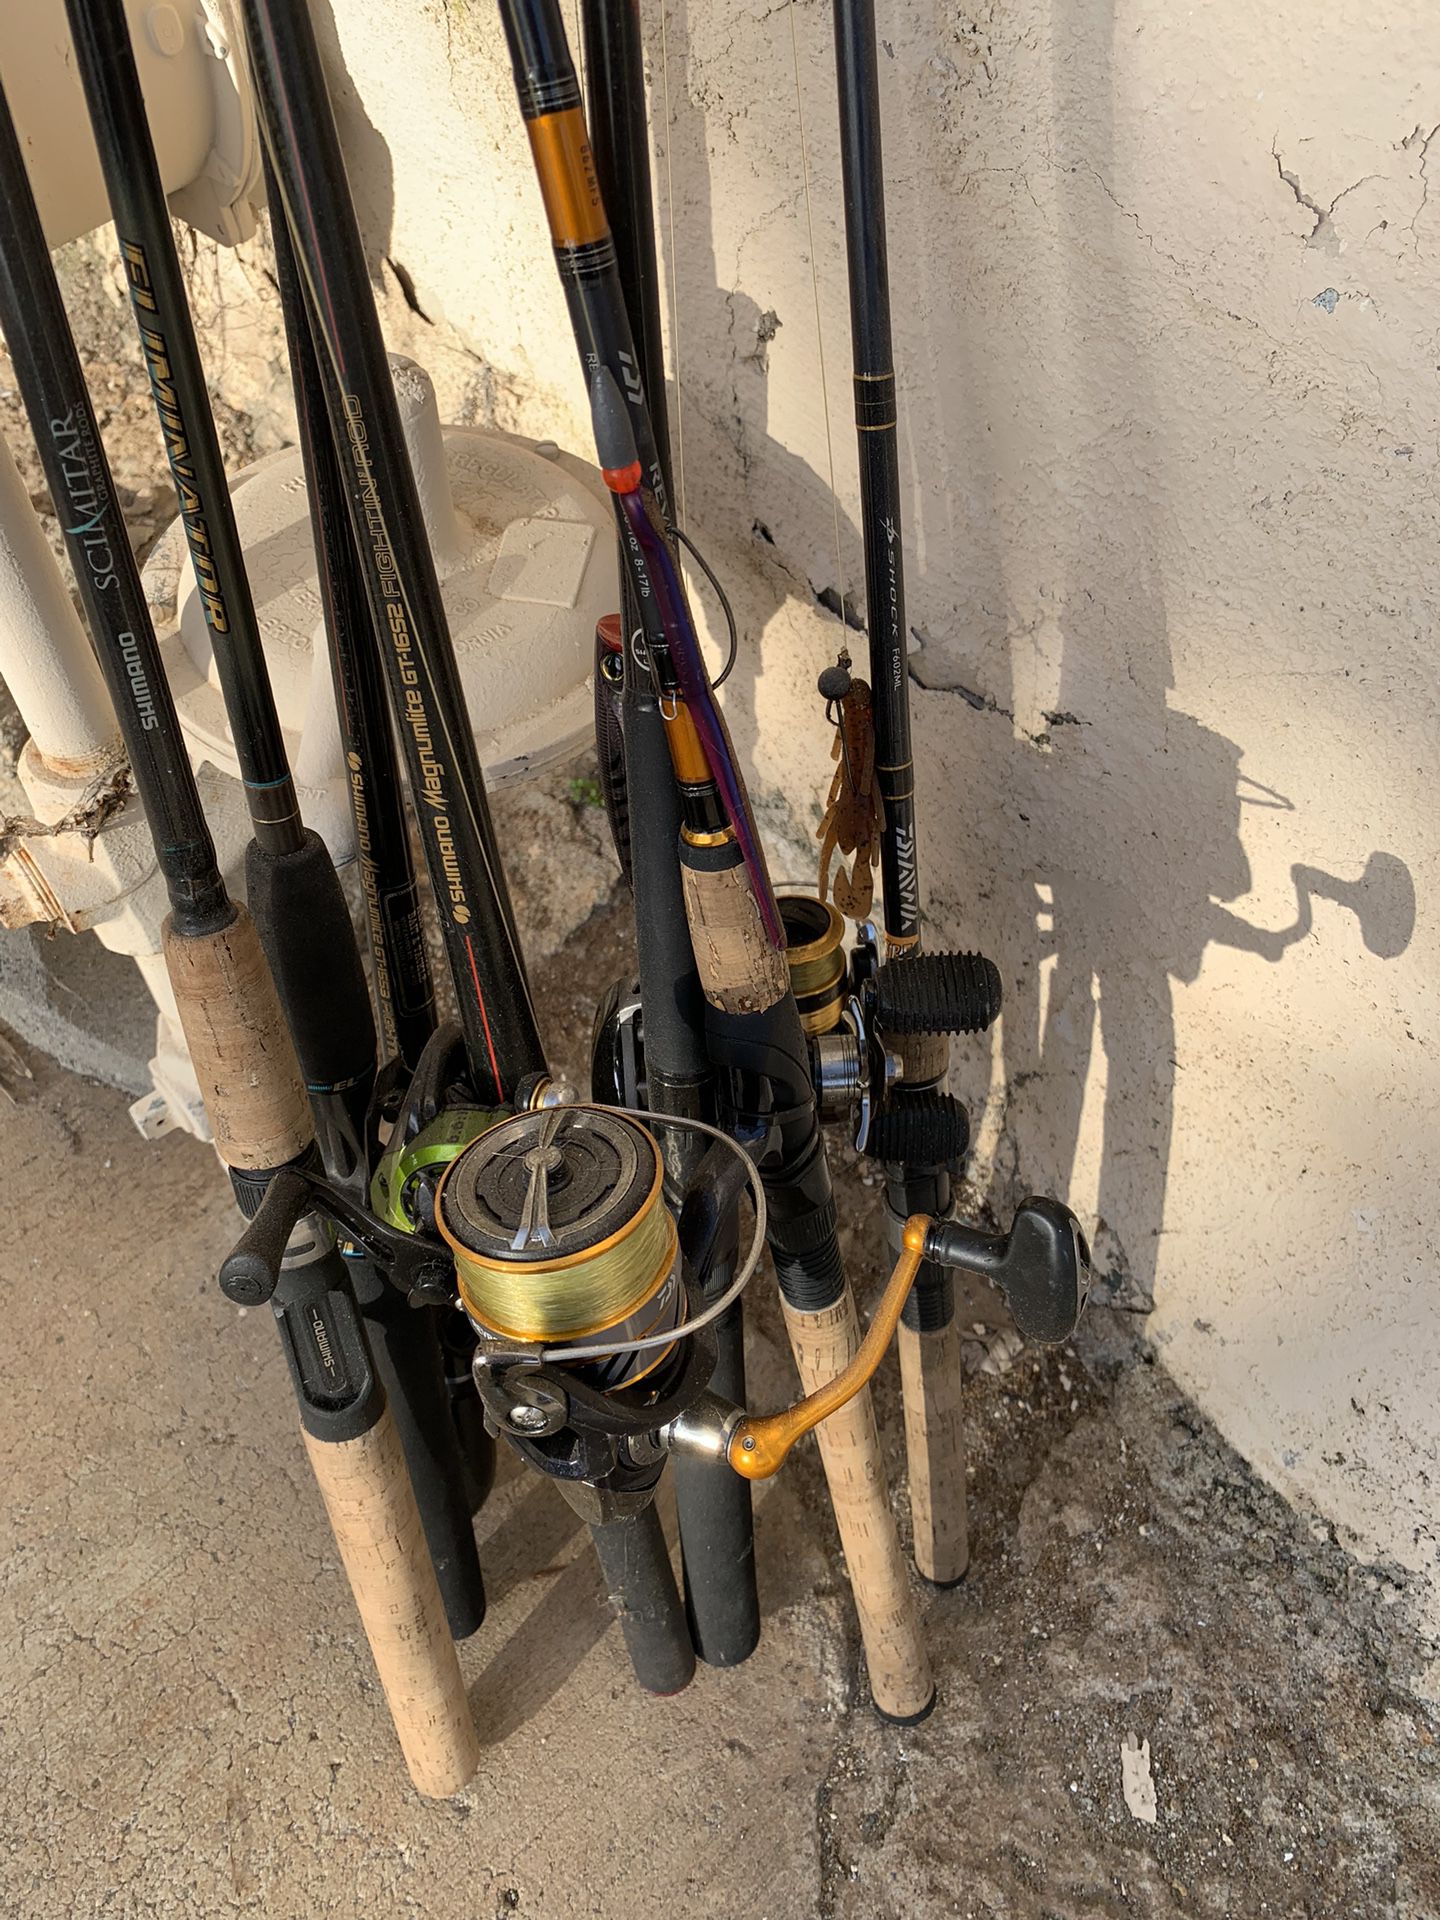 Fishing Rods for Sale in San Diego, CA - OfferUp